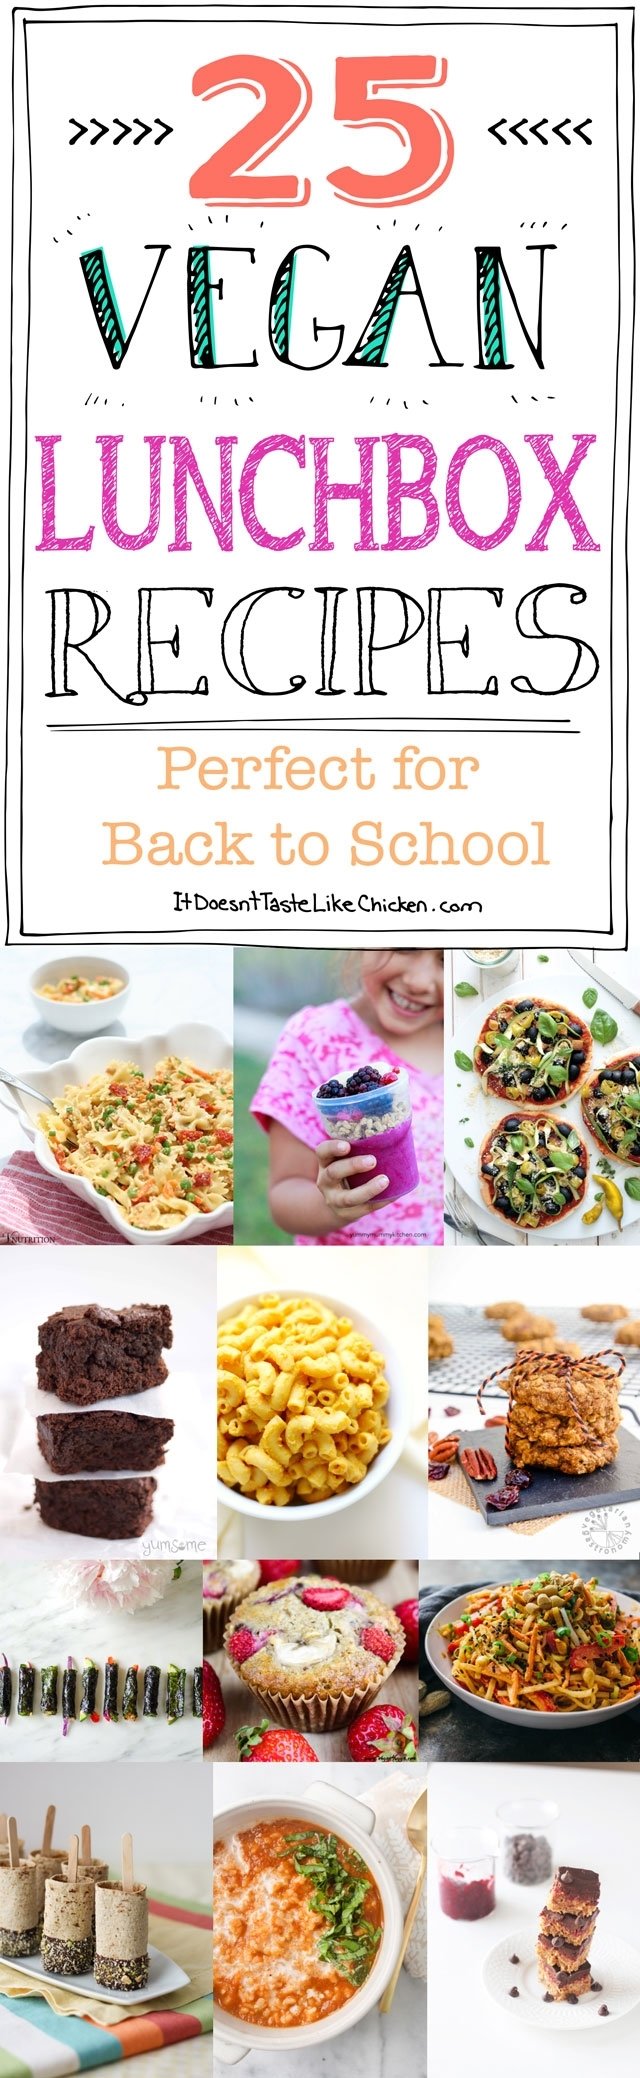 10 Most Popular Kid Friendly Lunch Box Ideas 25 vegan lunchbox recipes perfect for back to school e280a2 it doesnt 2022